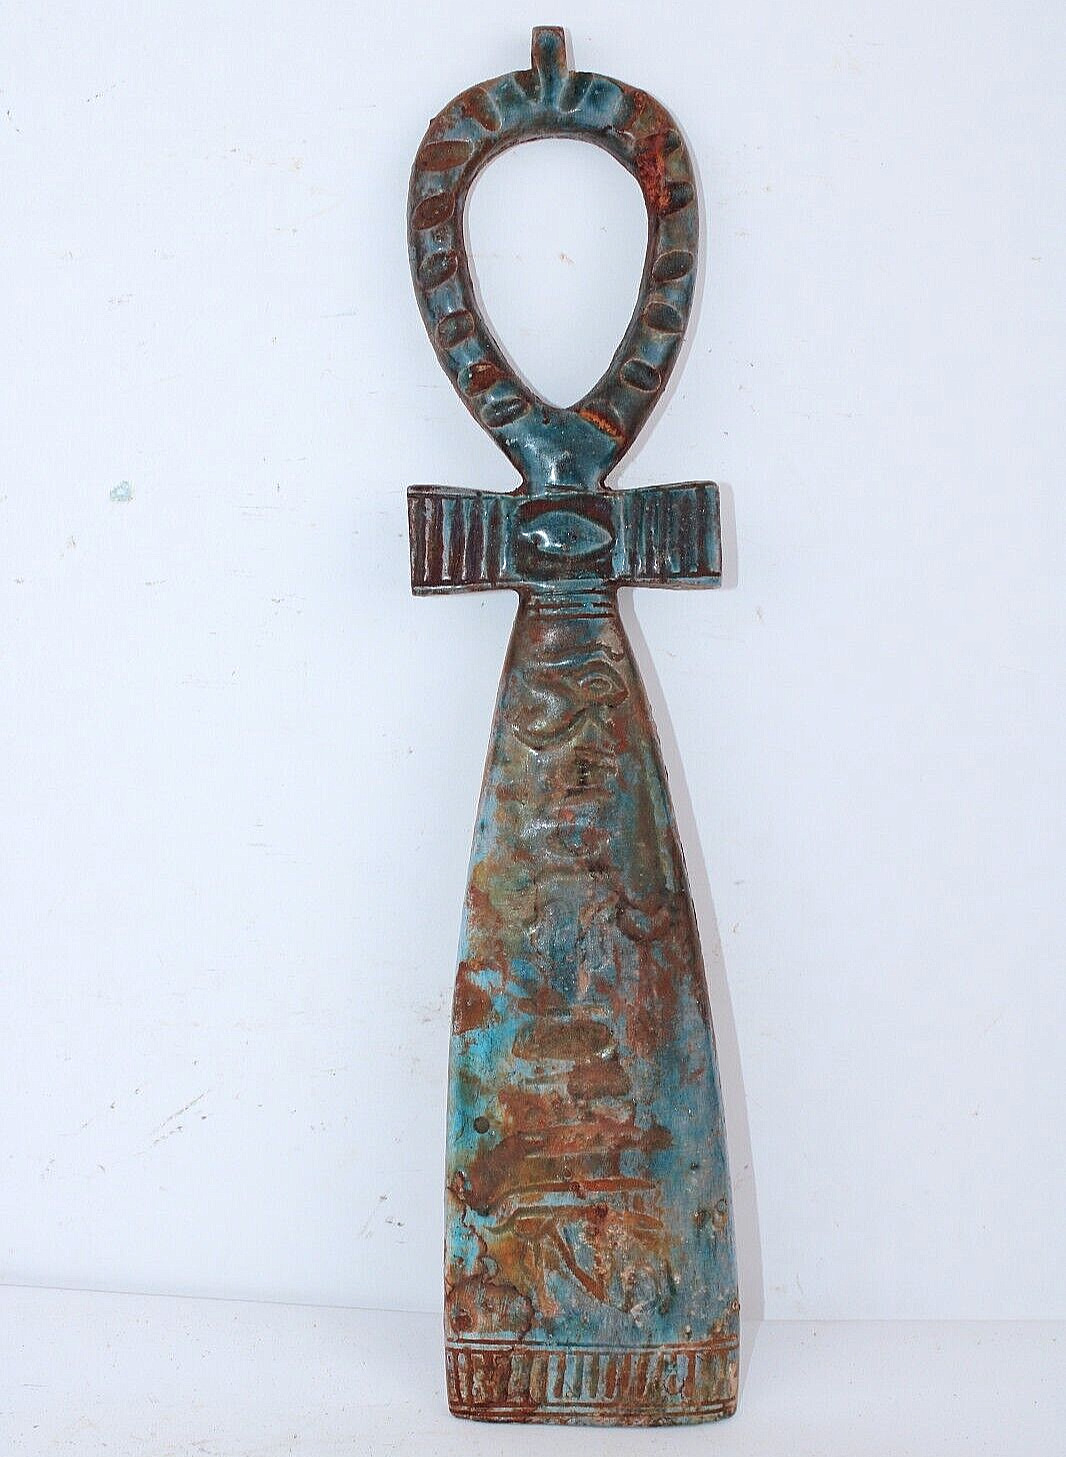 RARE ANCIENT EGYPTIAN ANTIQUE ANKH KEY Of Life Pharaonic Statue (A1+)